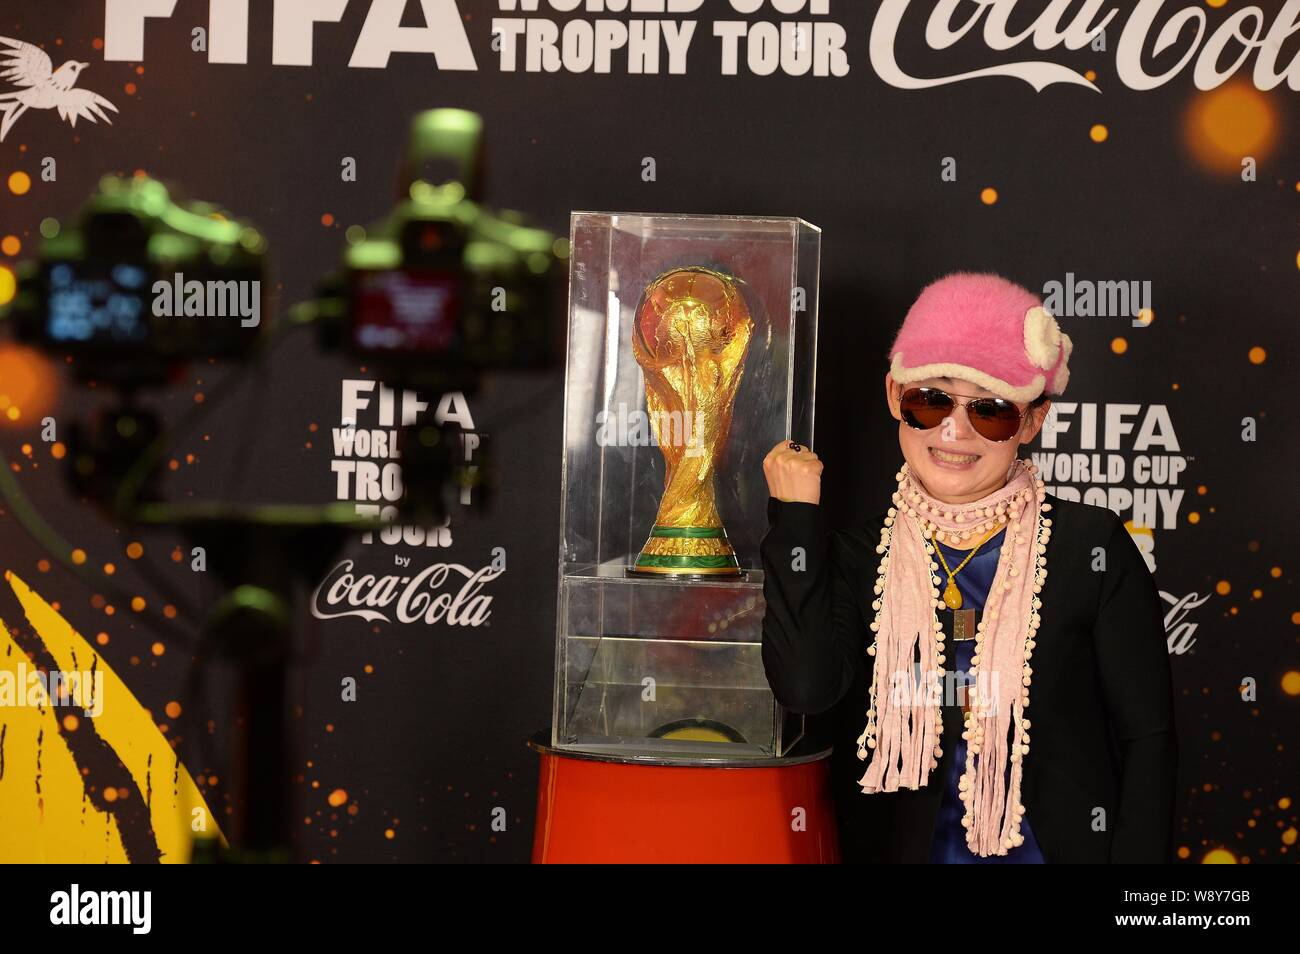 A Chinese visitor poses with a replica of the FIFA World Cup Trophy during the FIFA World Cup Trophy Tour in Shanghai, China, 9 April 2014. Stock Photo